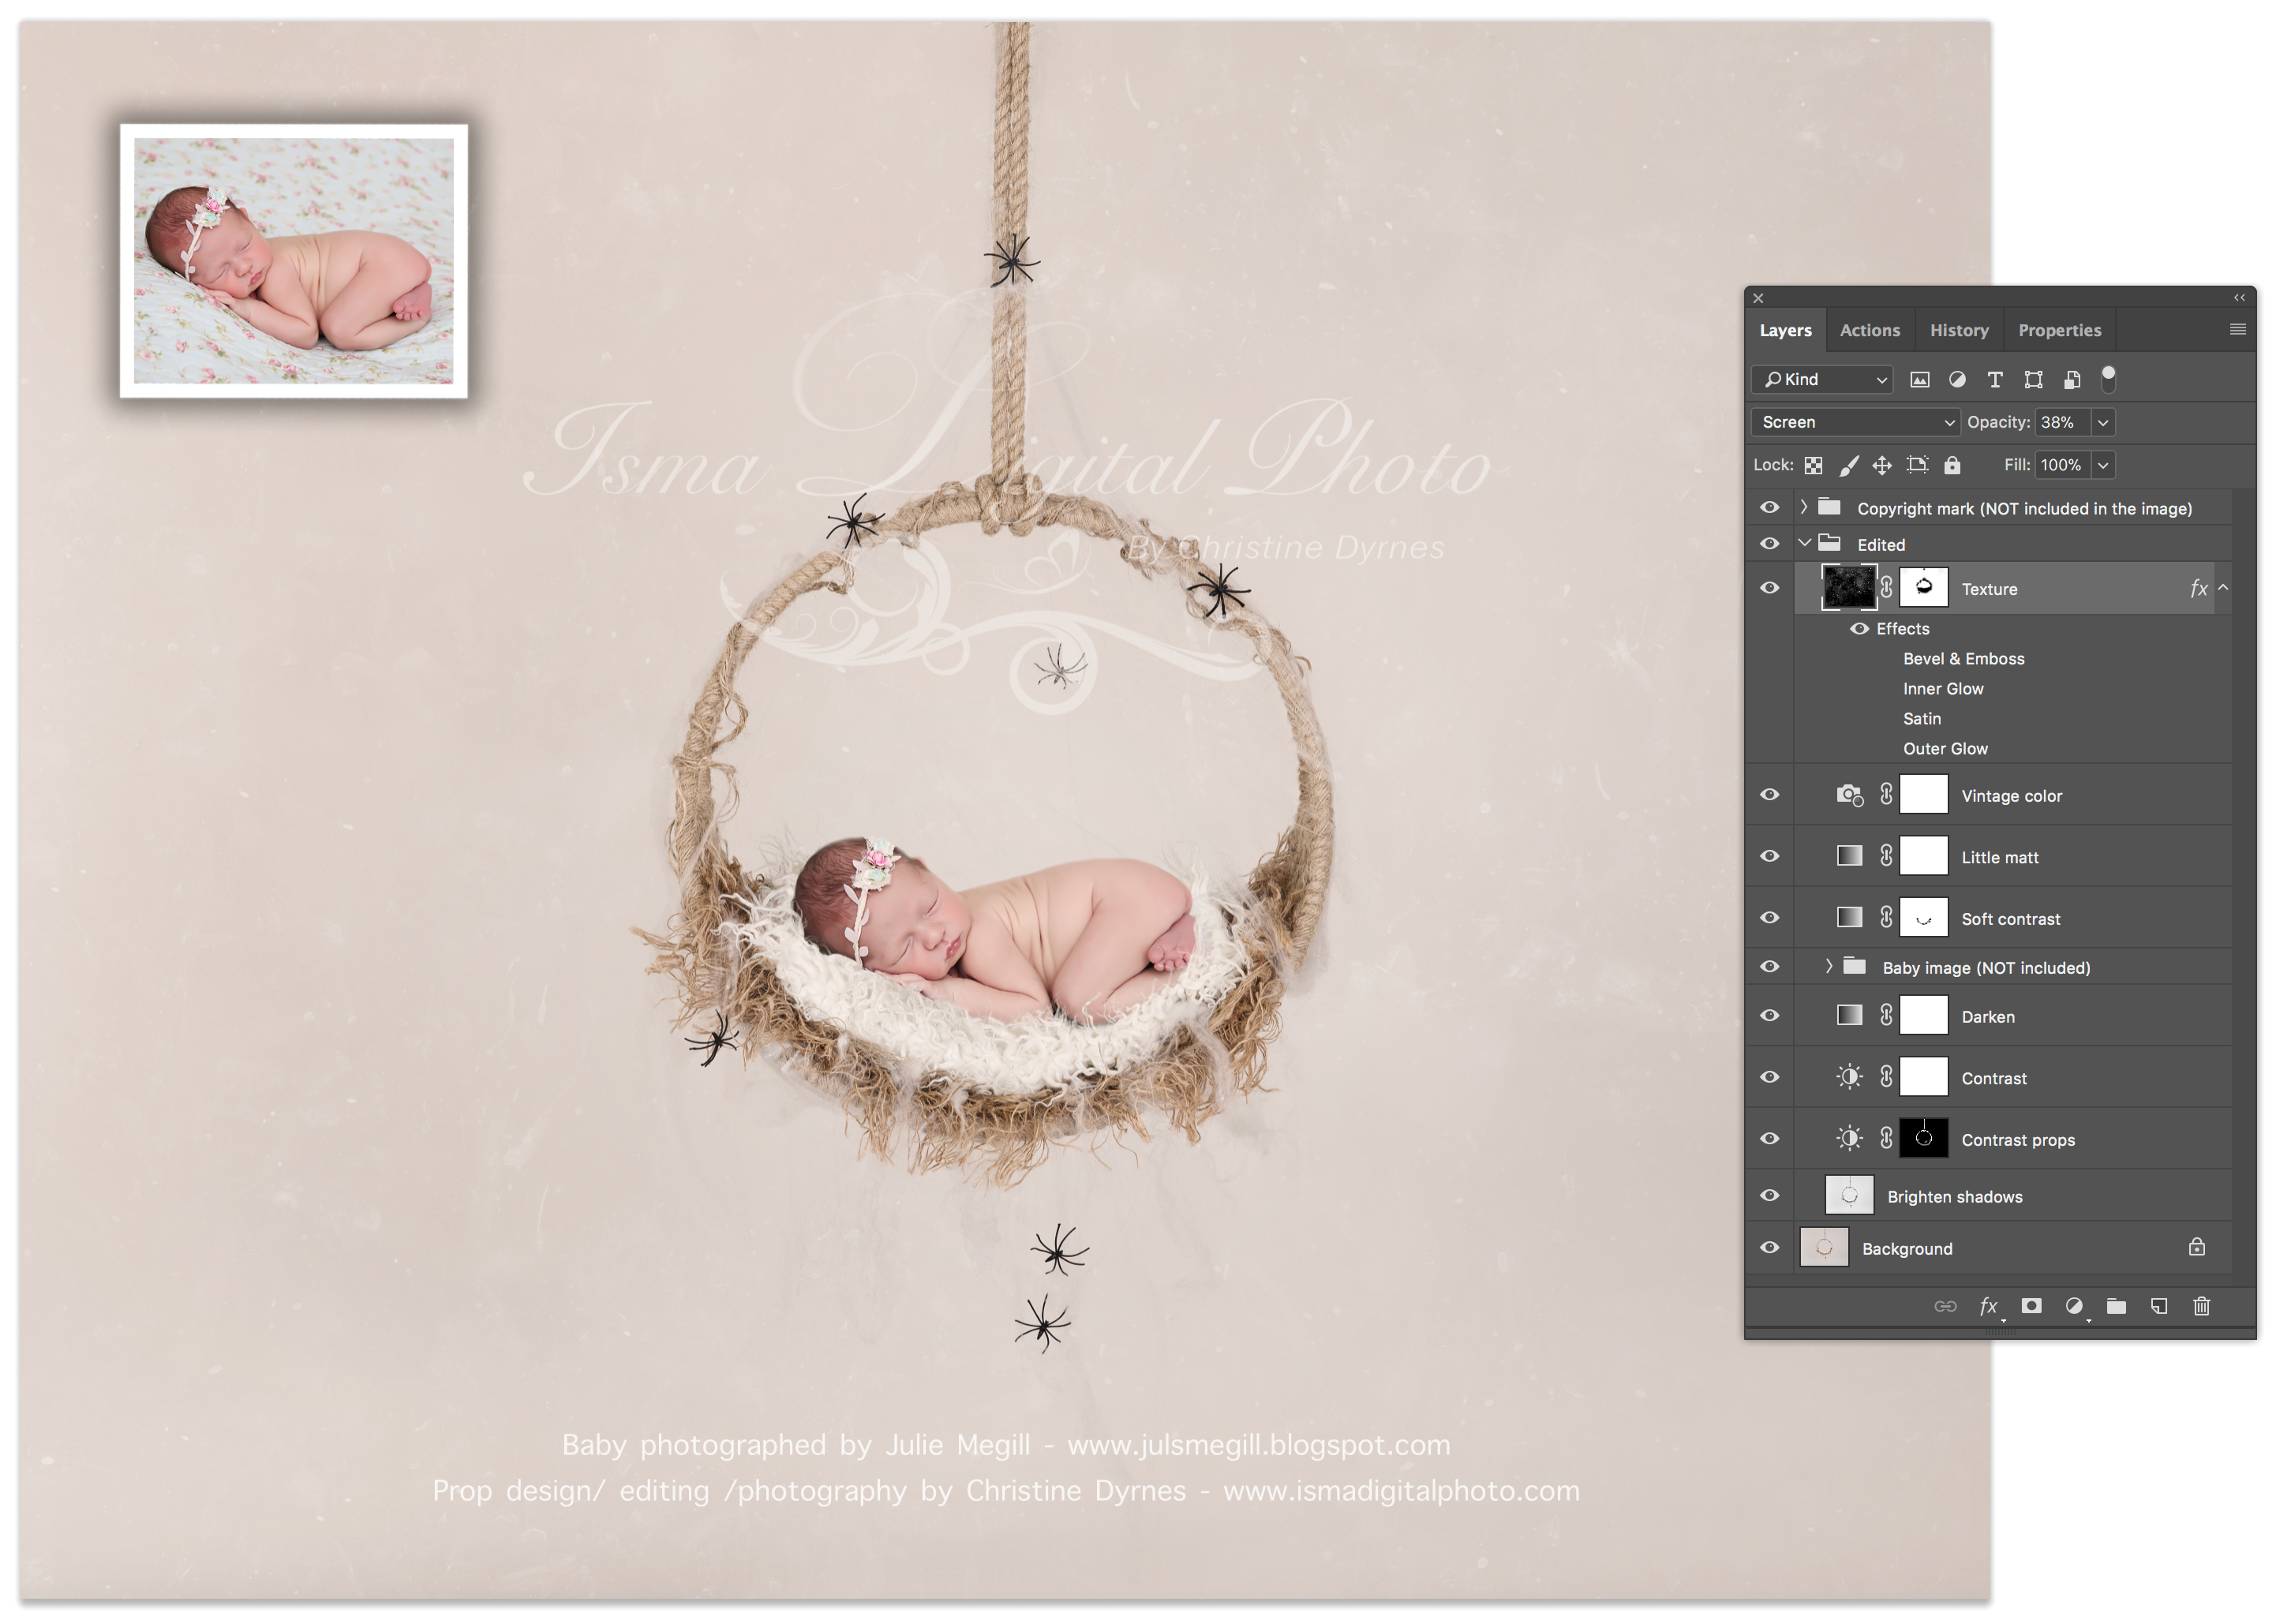 Halloween hanging circle design - Digital Photography Backdrop /Props for Newborn Photography - High resolution digital backdrop - One JPG and one PSD file with layers